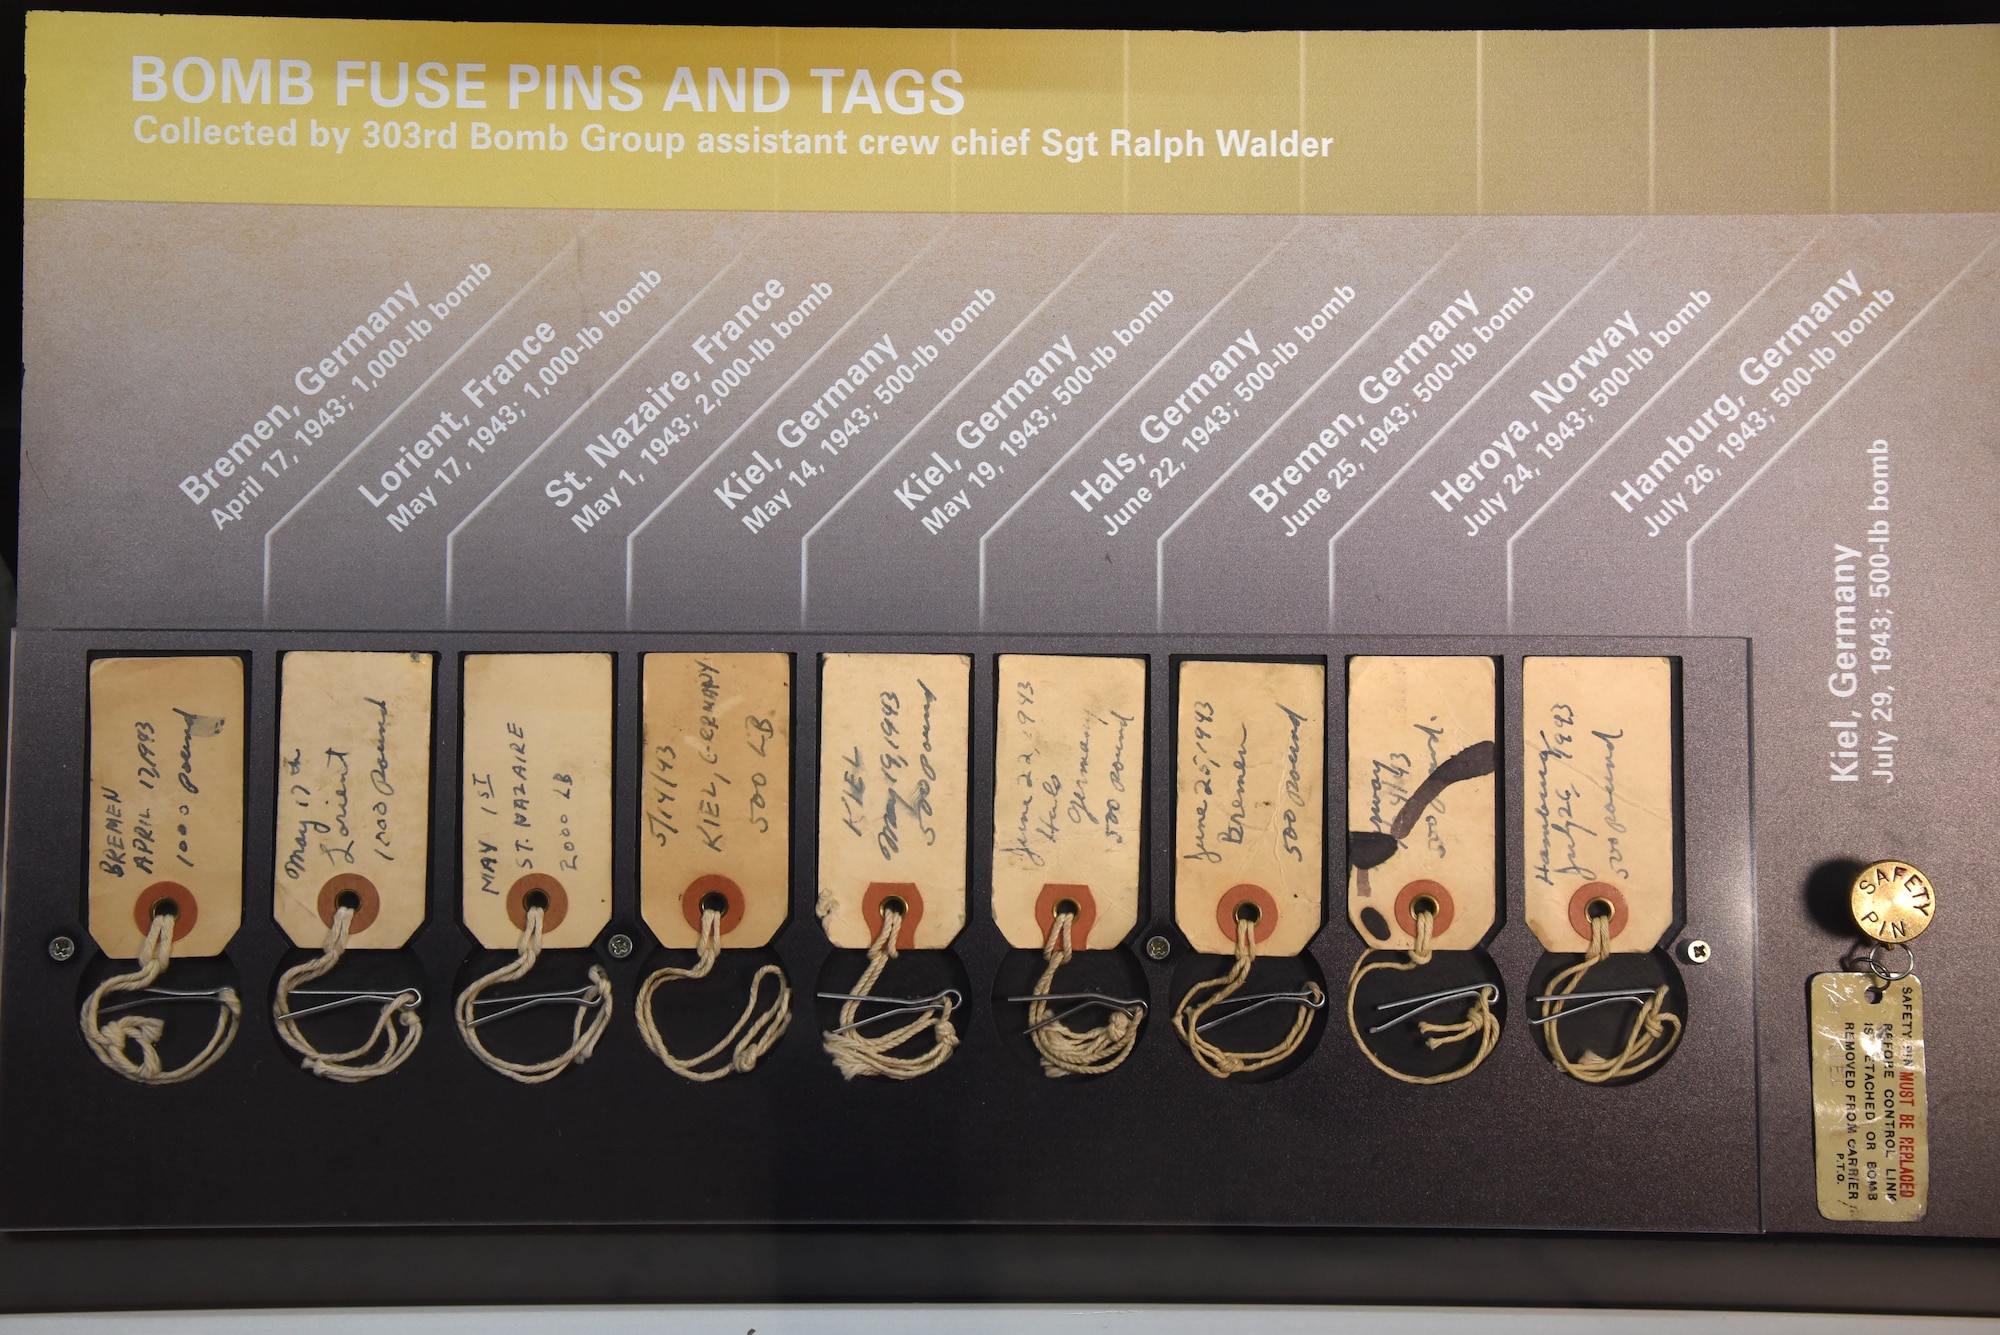 Bomb fuse pins and tags collected by 303rd Bomb Group assistant crew chief Sgt Ralph Walder:

Bremen, Germany; April 17, 1943; 1,000-lb bomb [1982-79-2] 
Lorient, France; May 17, 1943; 1,000-lb bomb [1982-79-1] 
St. Nazaire, France; May 1, 1943; 2,000-lb bomb [1982-79-3] 
Kiel, Germany; May 14, 1943; 500-lb bomb [1982-79-12] 
Kiel, Germany; May 19, 1943; 500-lb bomb [1982-79-4] 
Hals, Germany; June 22, 1943; 500-lb bomb [1982-79-5] 
Bremen, Germany; June 25, 1943; 500-lb bomb [1982-79-6] 
Heroya, Norway; July 24, 1943; 500-lb bomb [1982-79-8] 
Hamburg, Germany; July 26, 1943; 500-lb bomb [1982-79-7] 
Kiel, Germany; July 29, 1943; 500-lb bomb [1982-79-9]